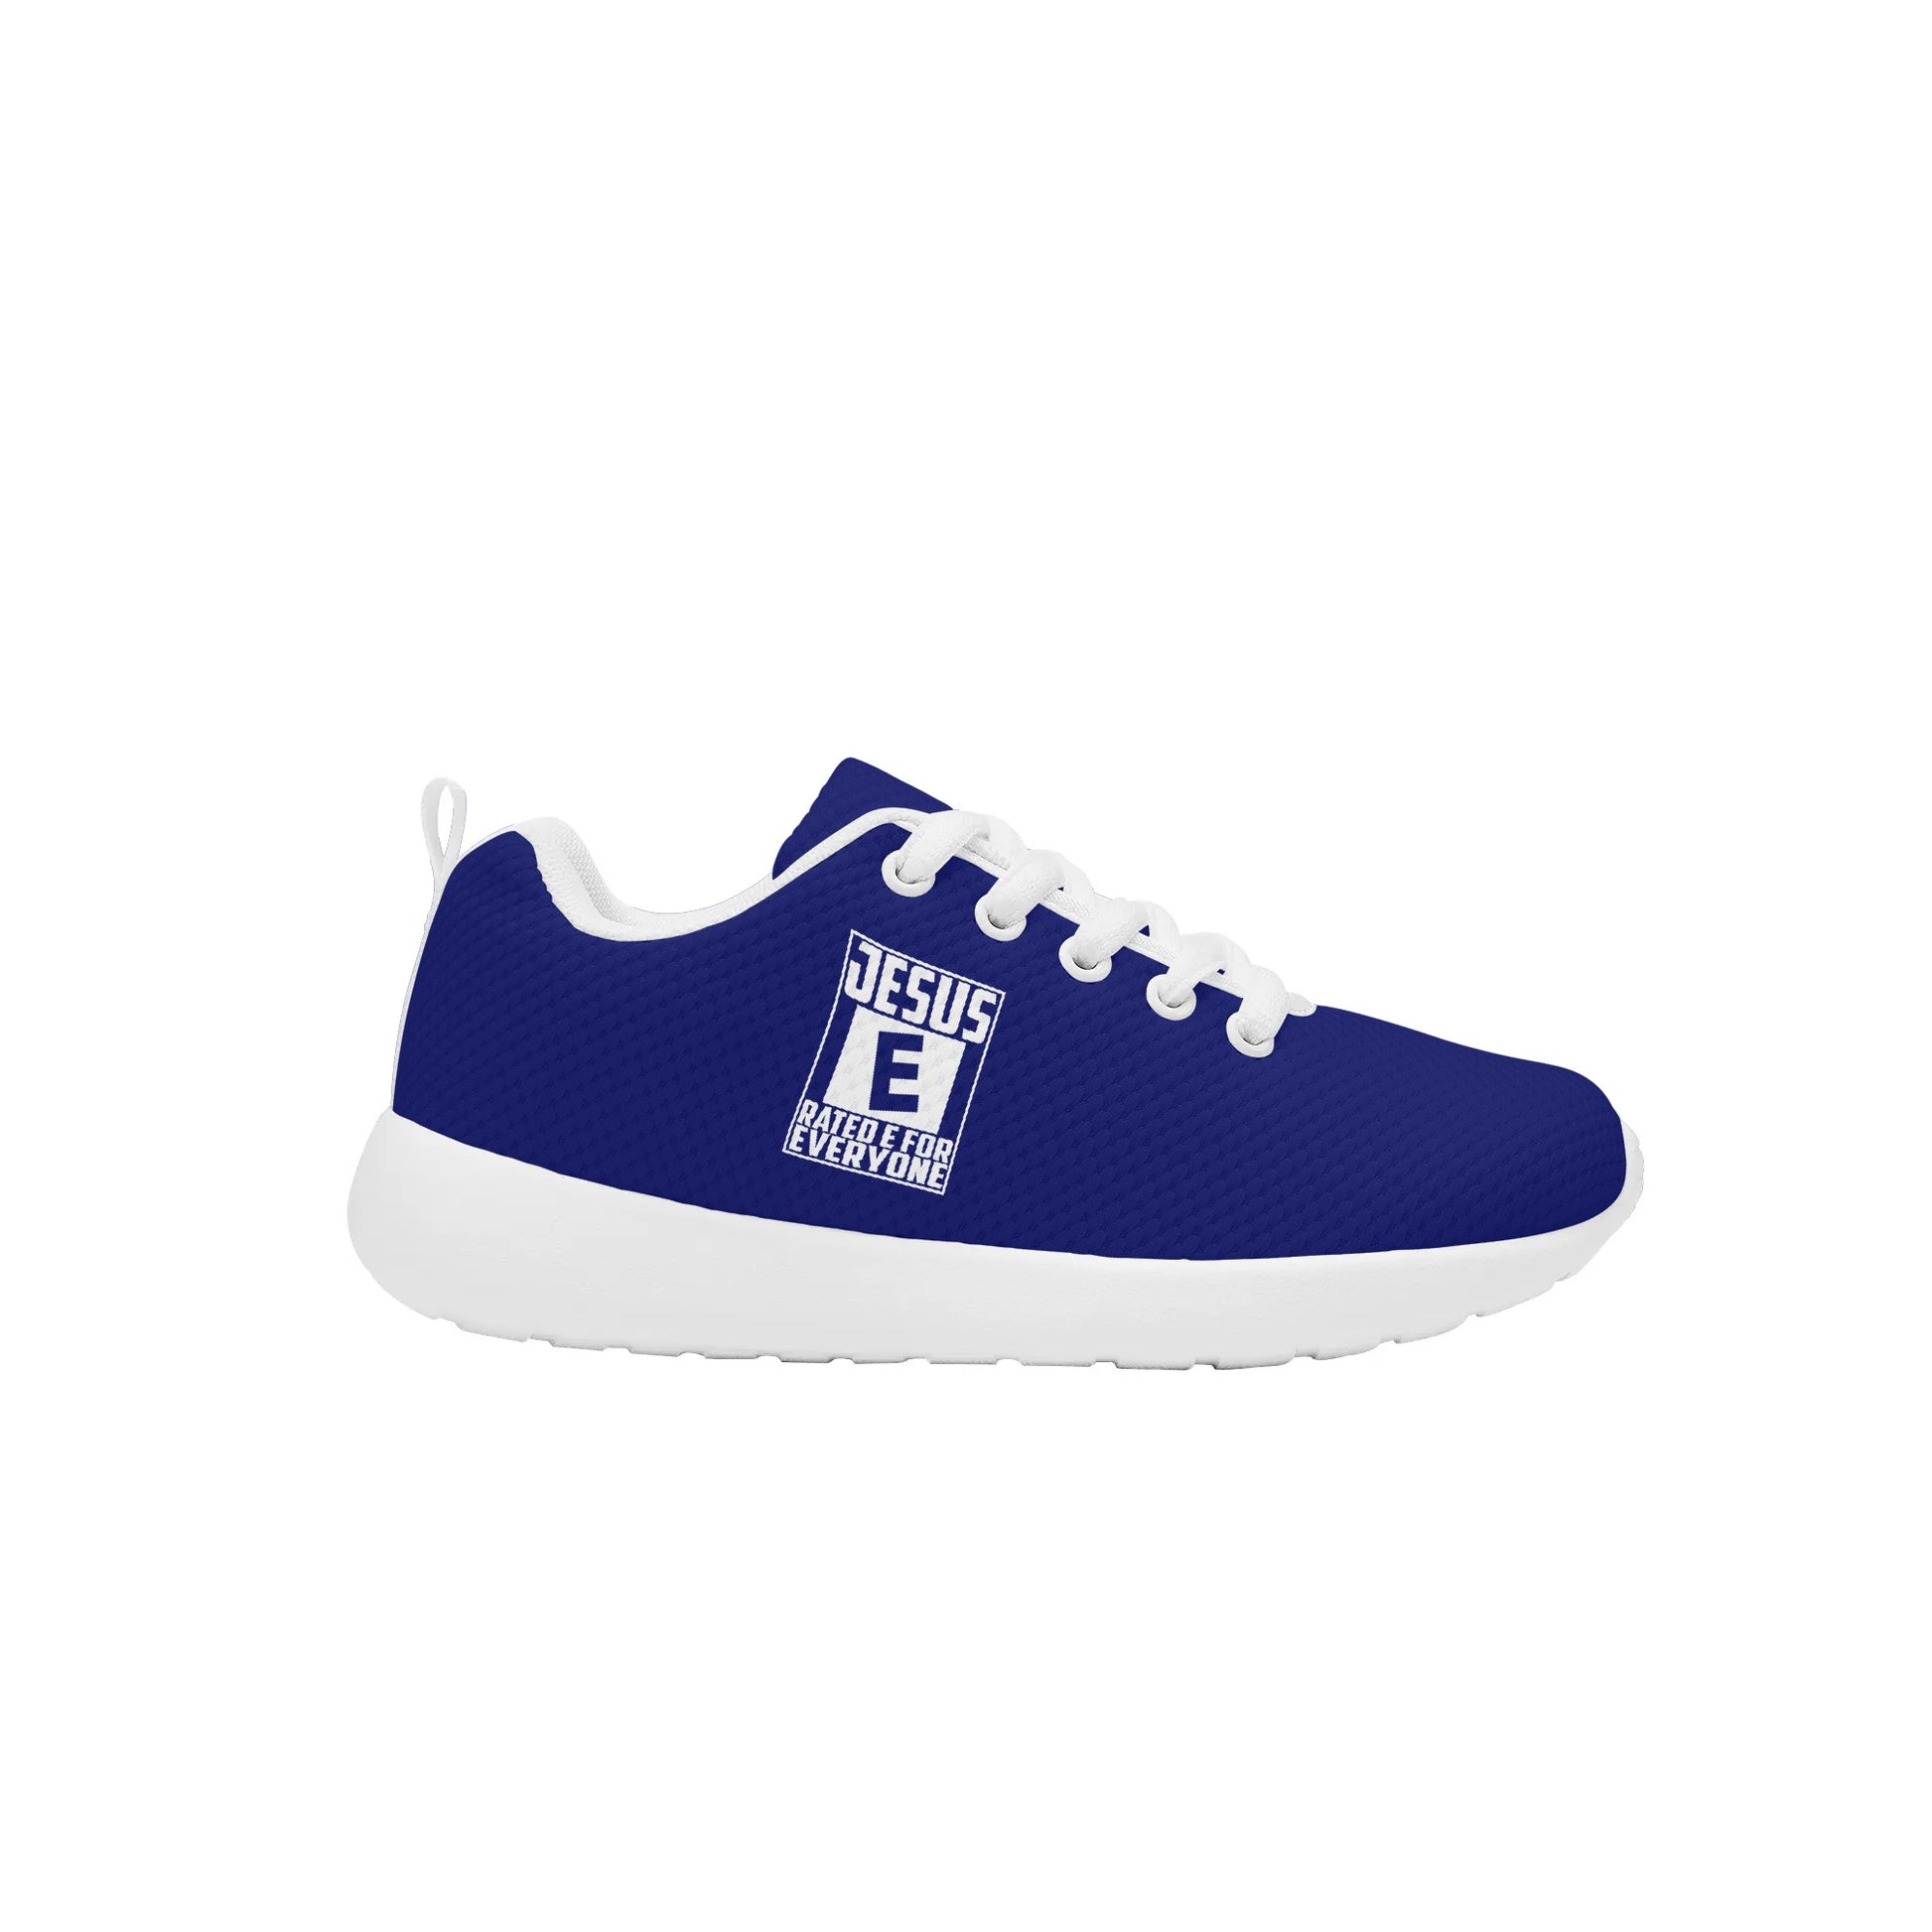 Jesus Rated E For Everyone Kids Lace-up Athletic Christian Sneakers popcustoms